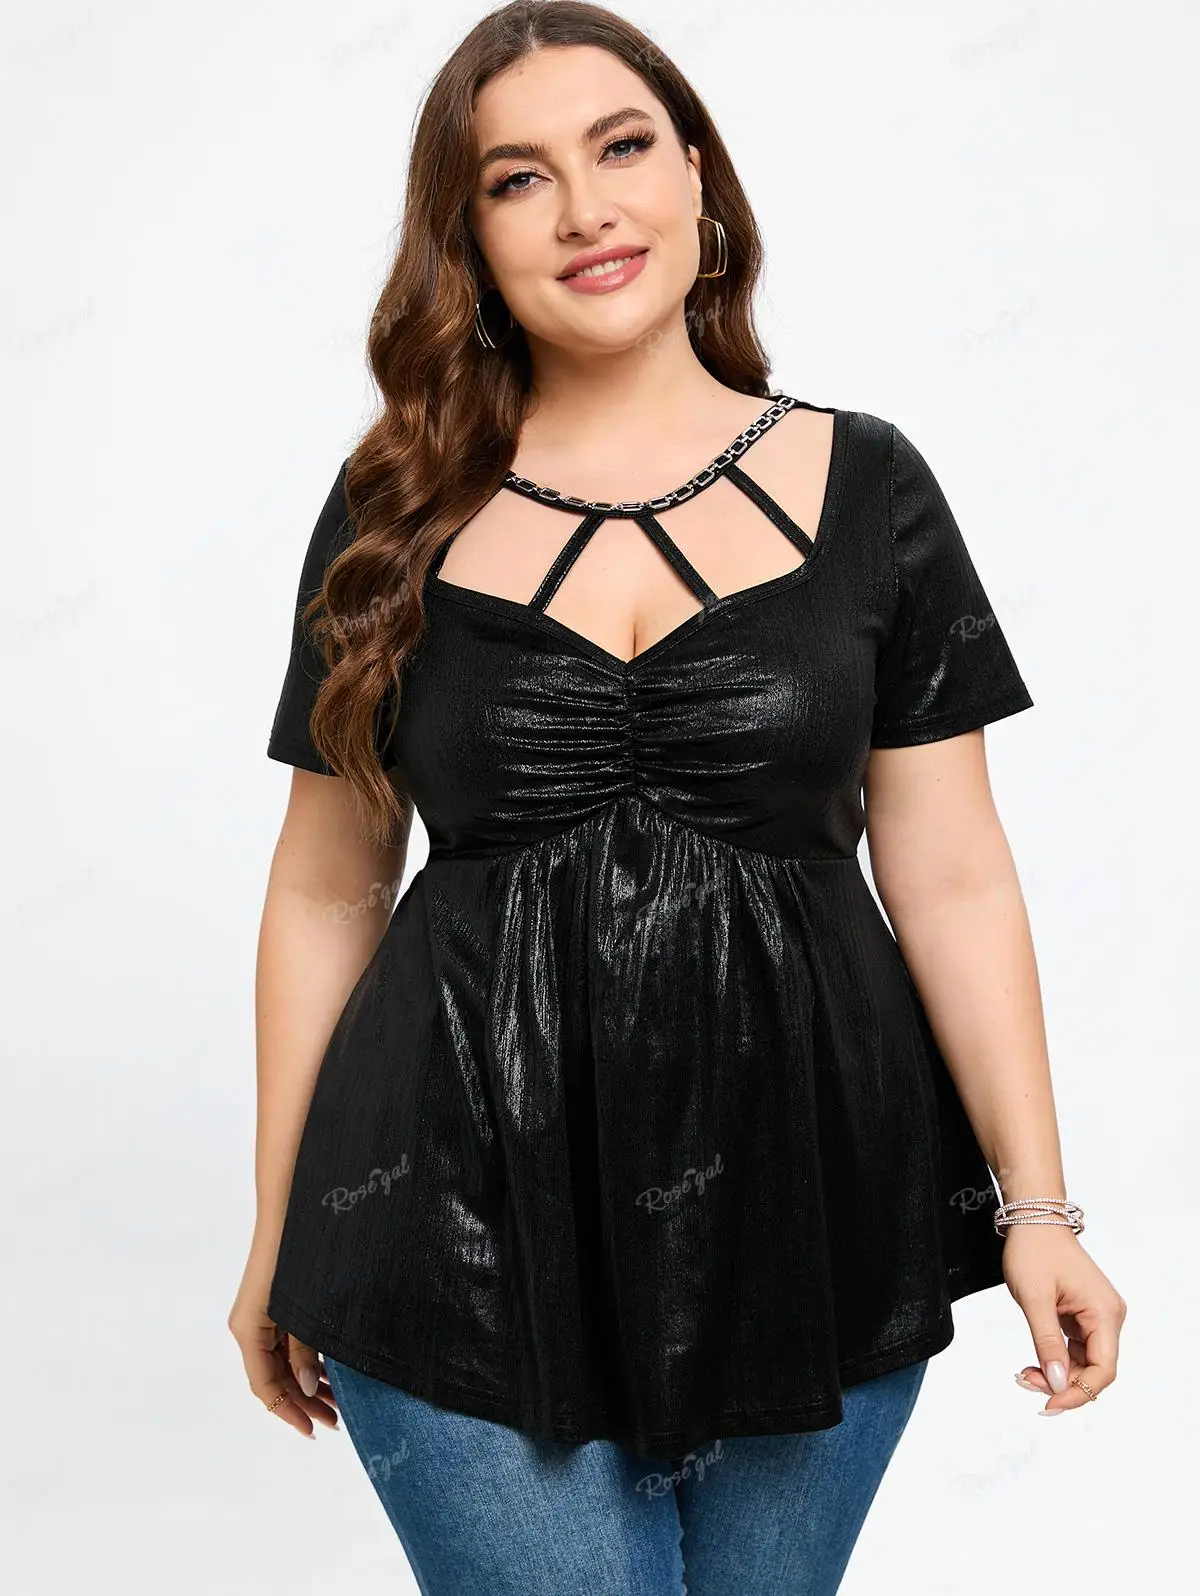 

ROSEGAL Plus Size Ruched Cutout Metal Tees Black Fashion Short Sleeves Tunic Tops For Women Streetwear T-shirts New Arrived 4XL